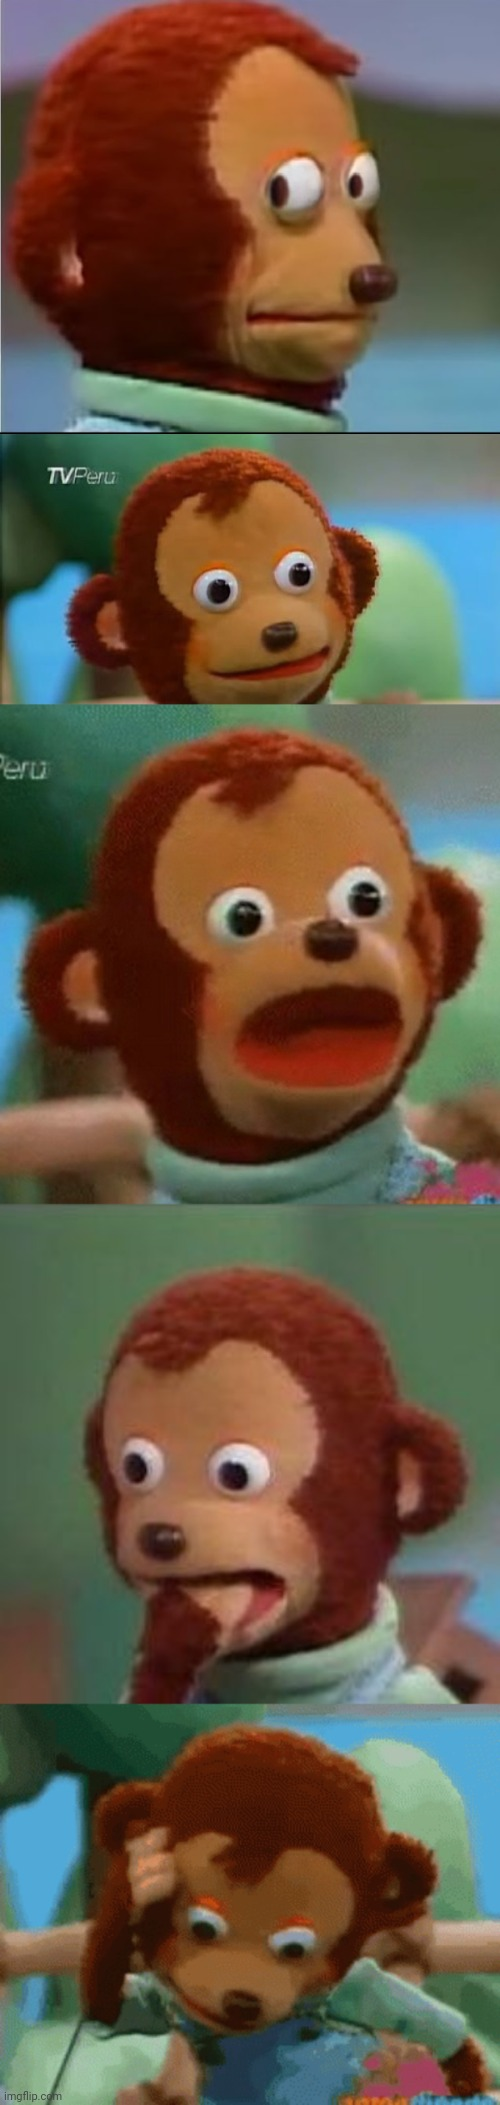 Surprised monkey puppet Blank Template Imgflip